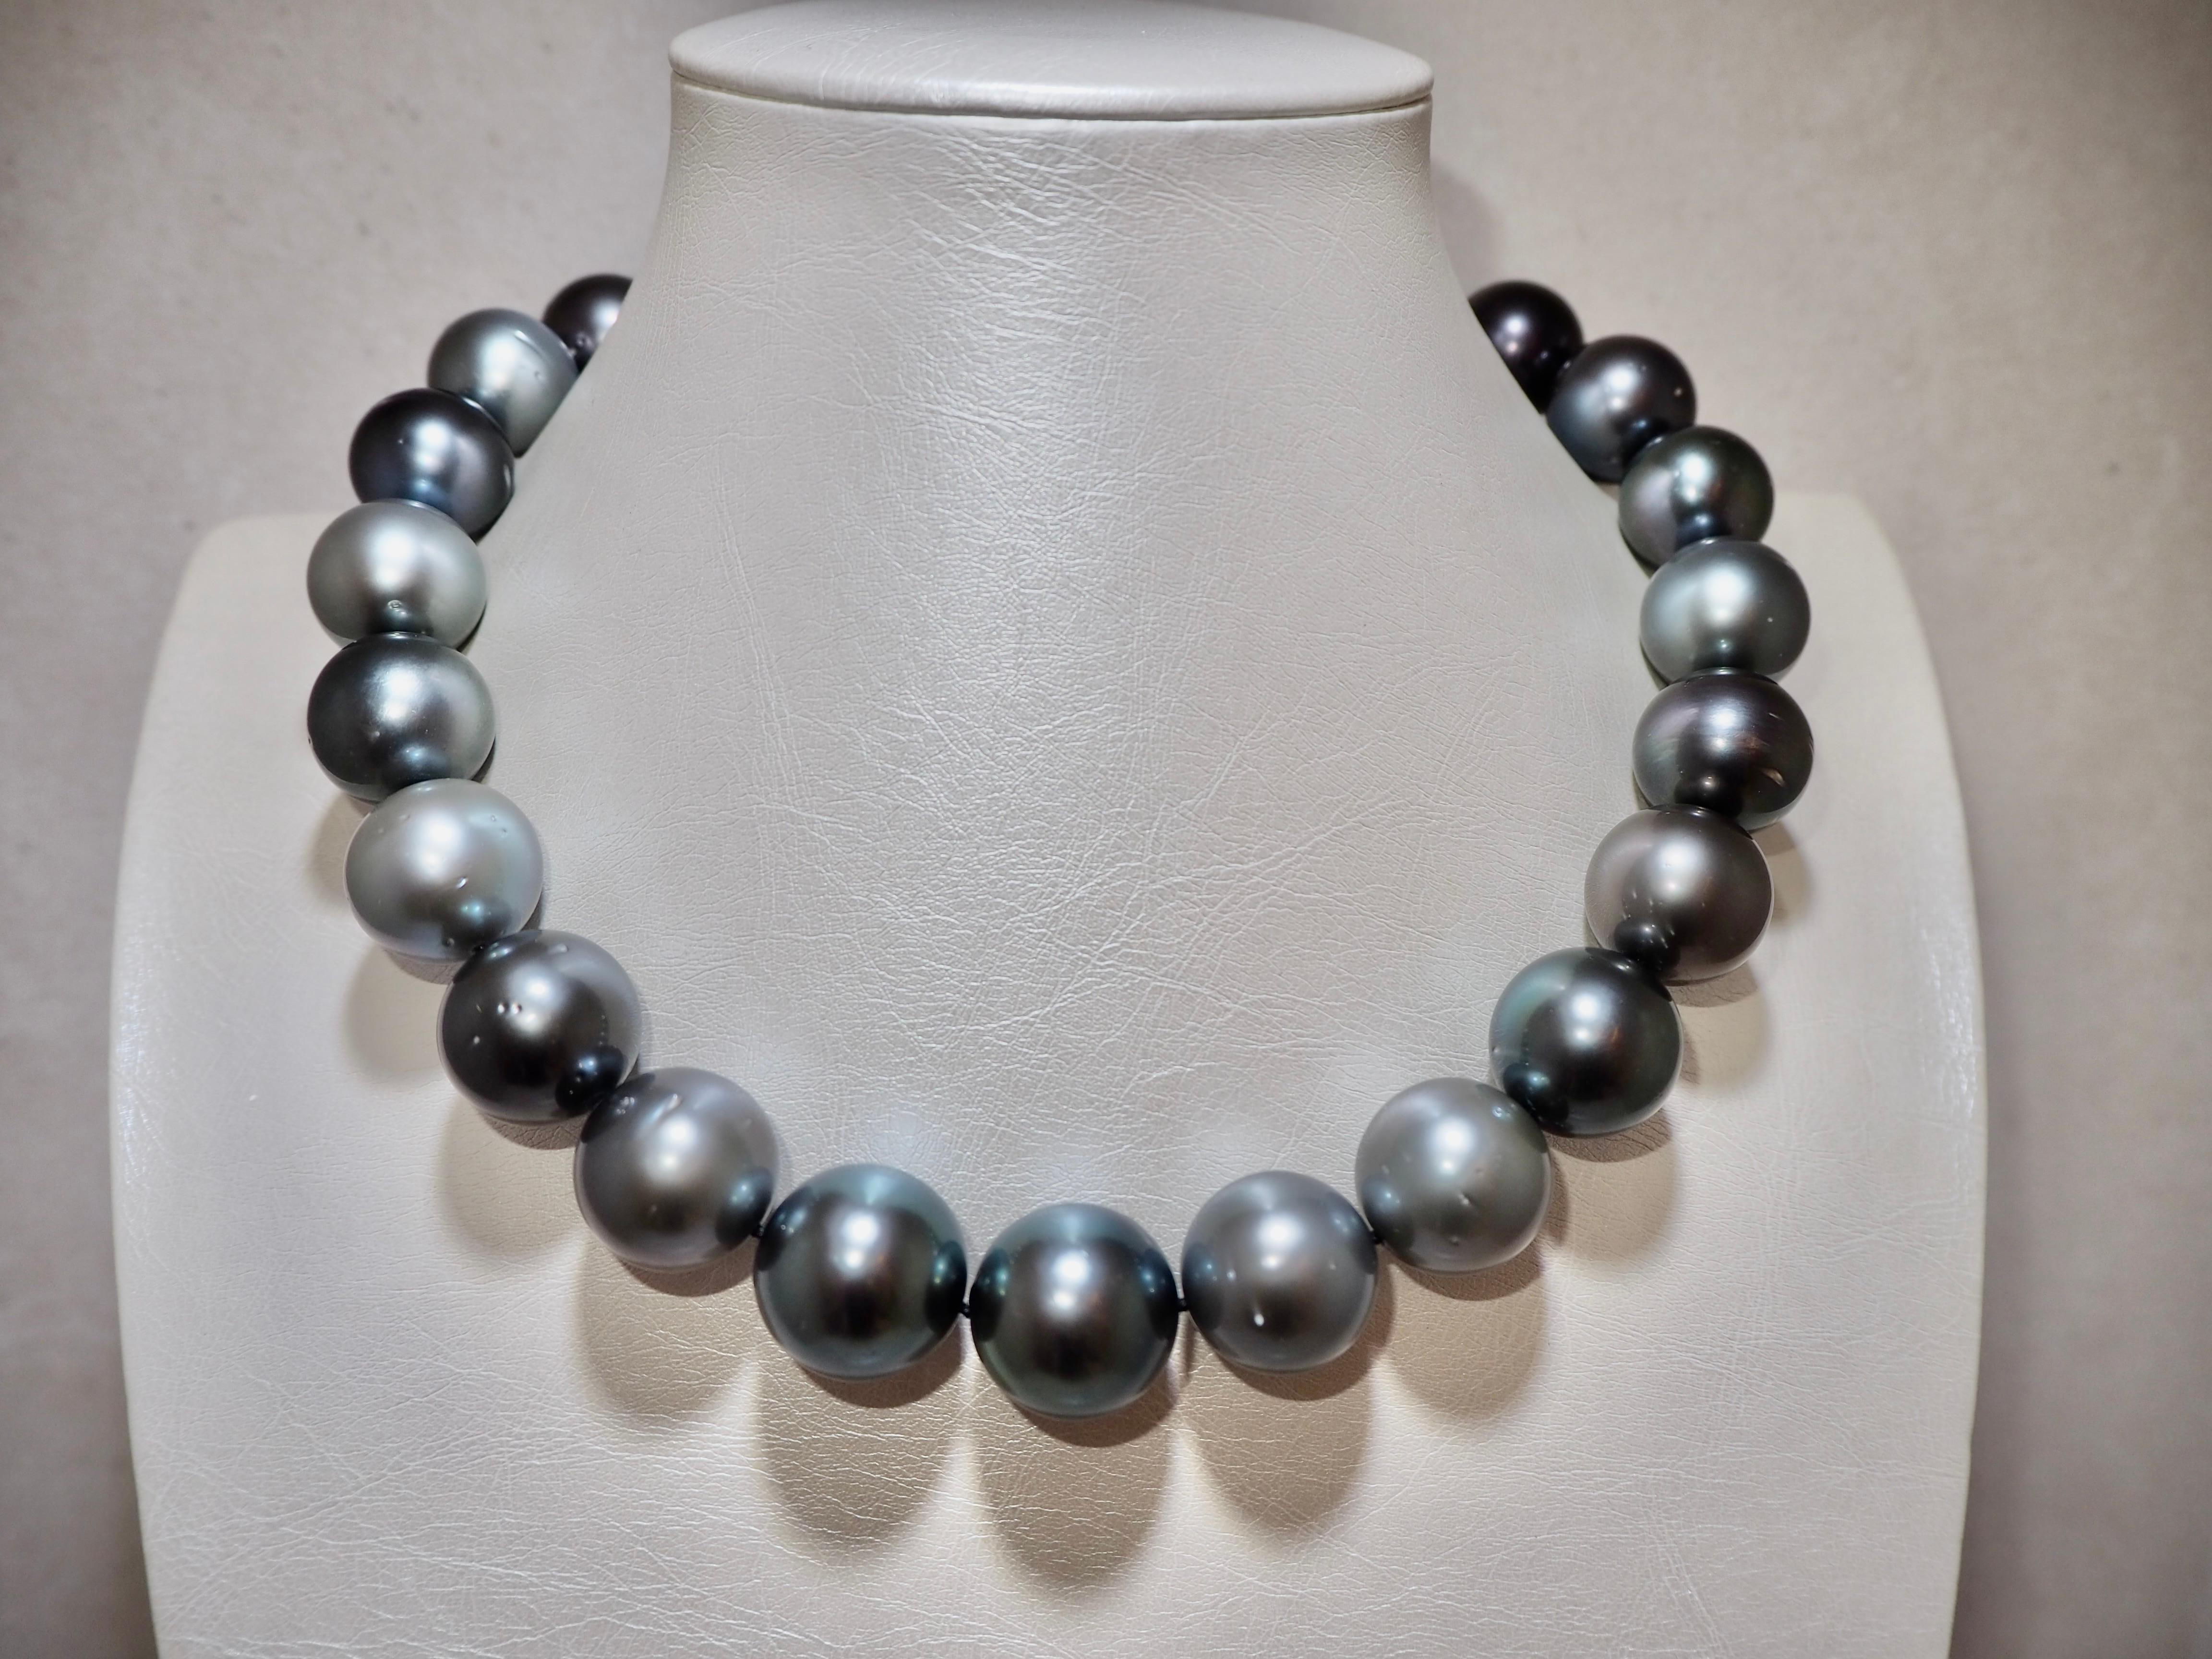 Brilliant Cut Tahitian Pearl Necklace  20-18mm Multicolor with Diamond Clasp 3.85 Carat  For Sale